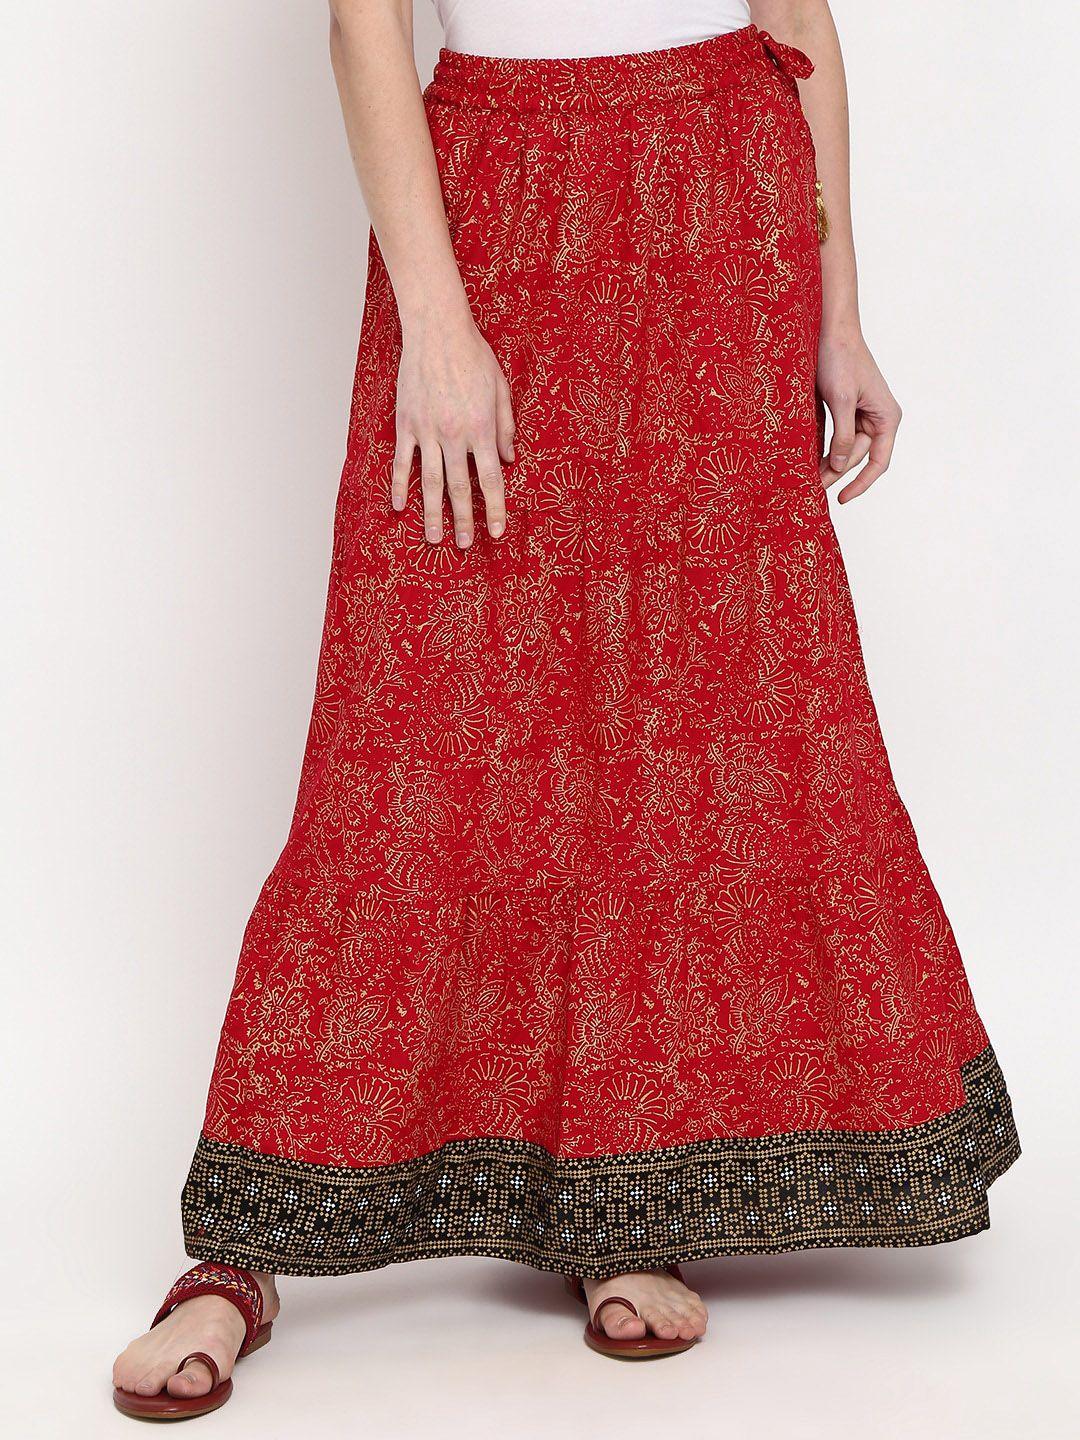 v-mart-women-red-floral-printed-straight-maxi-skirts